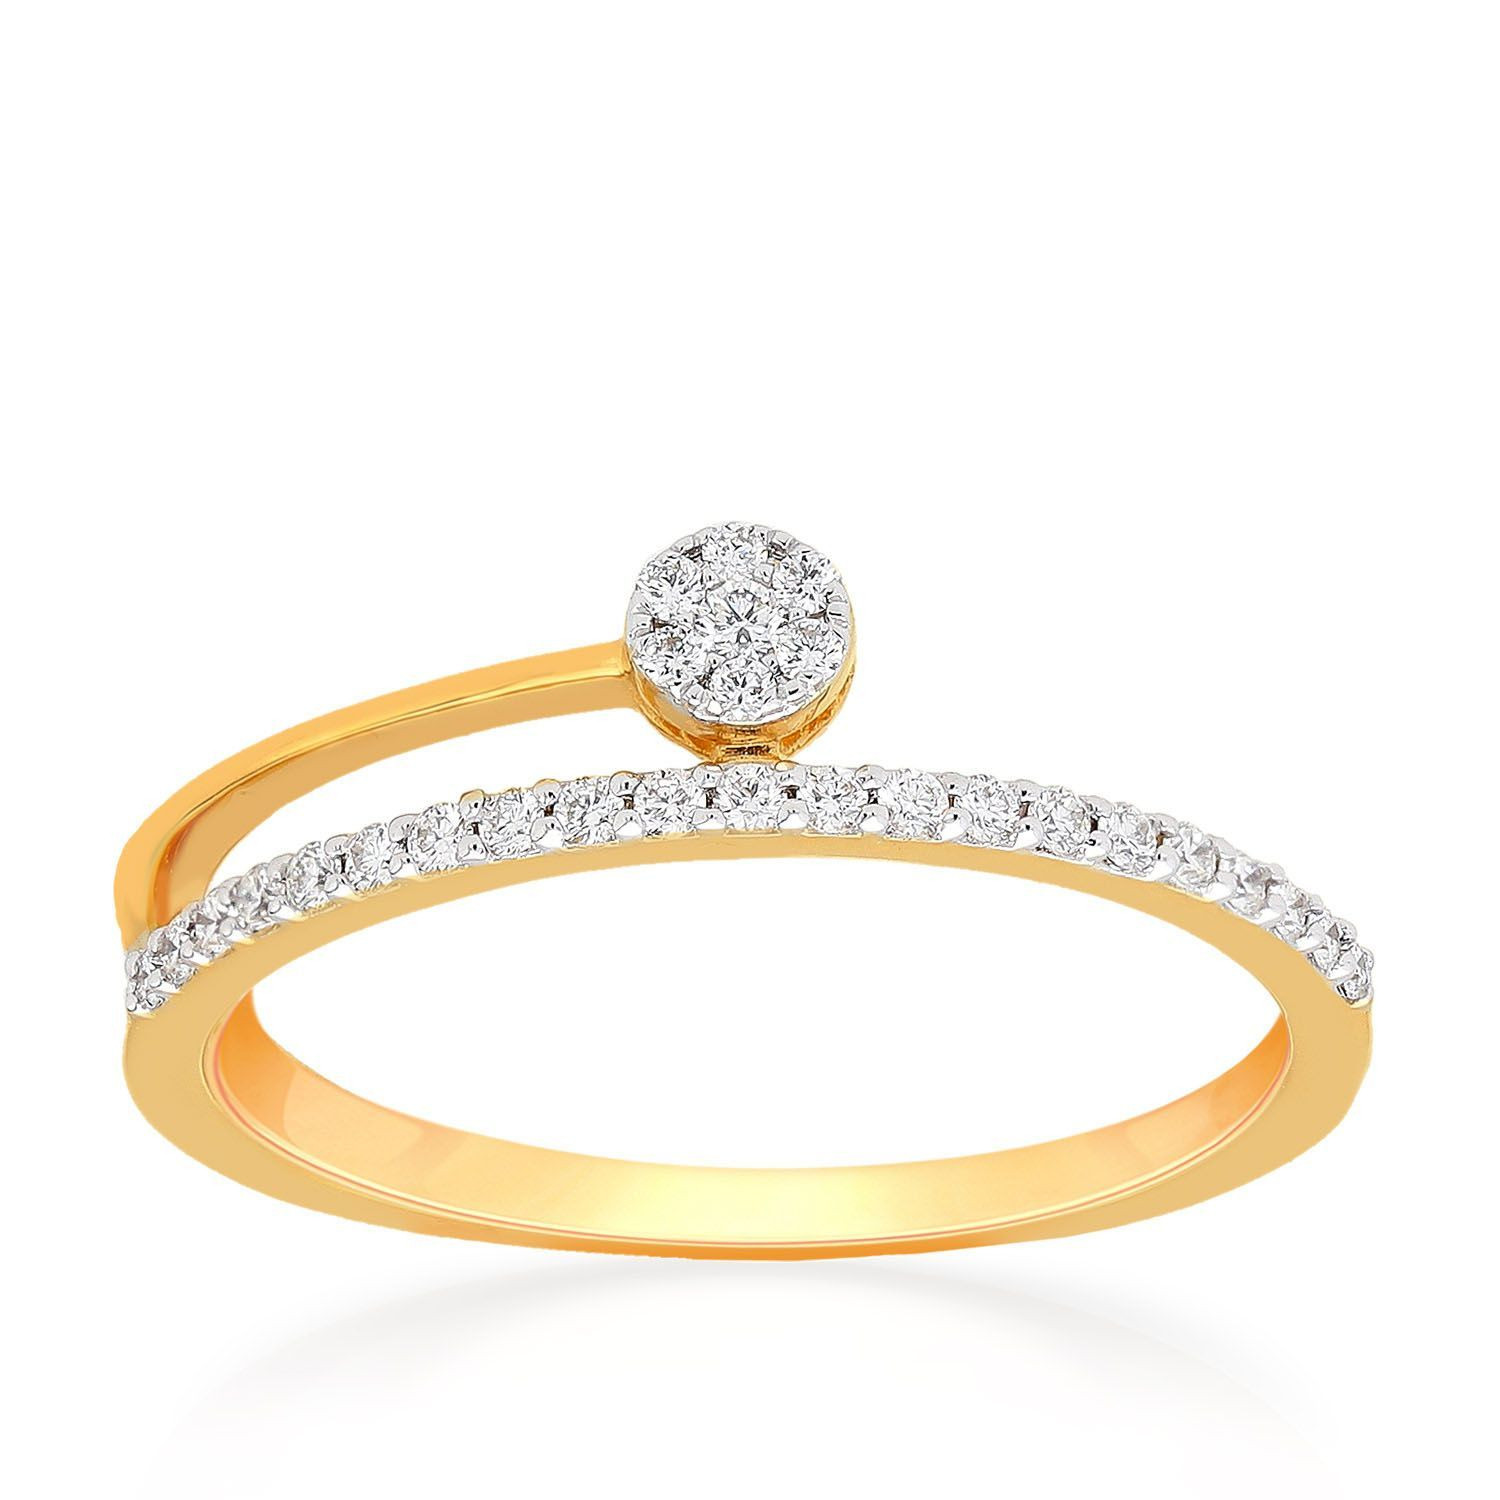 Shop Diamond Jewellery perfect for all occasions